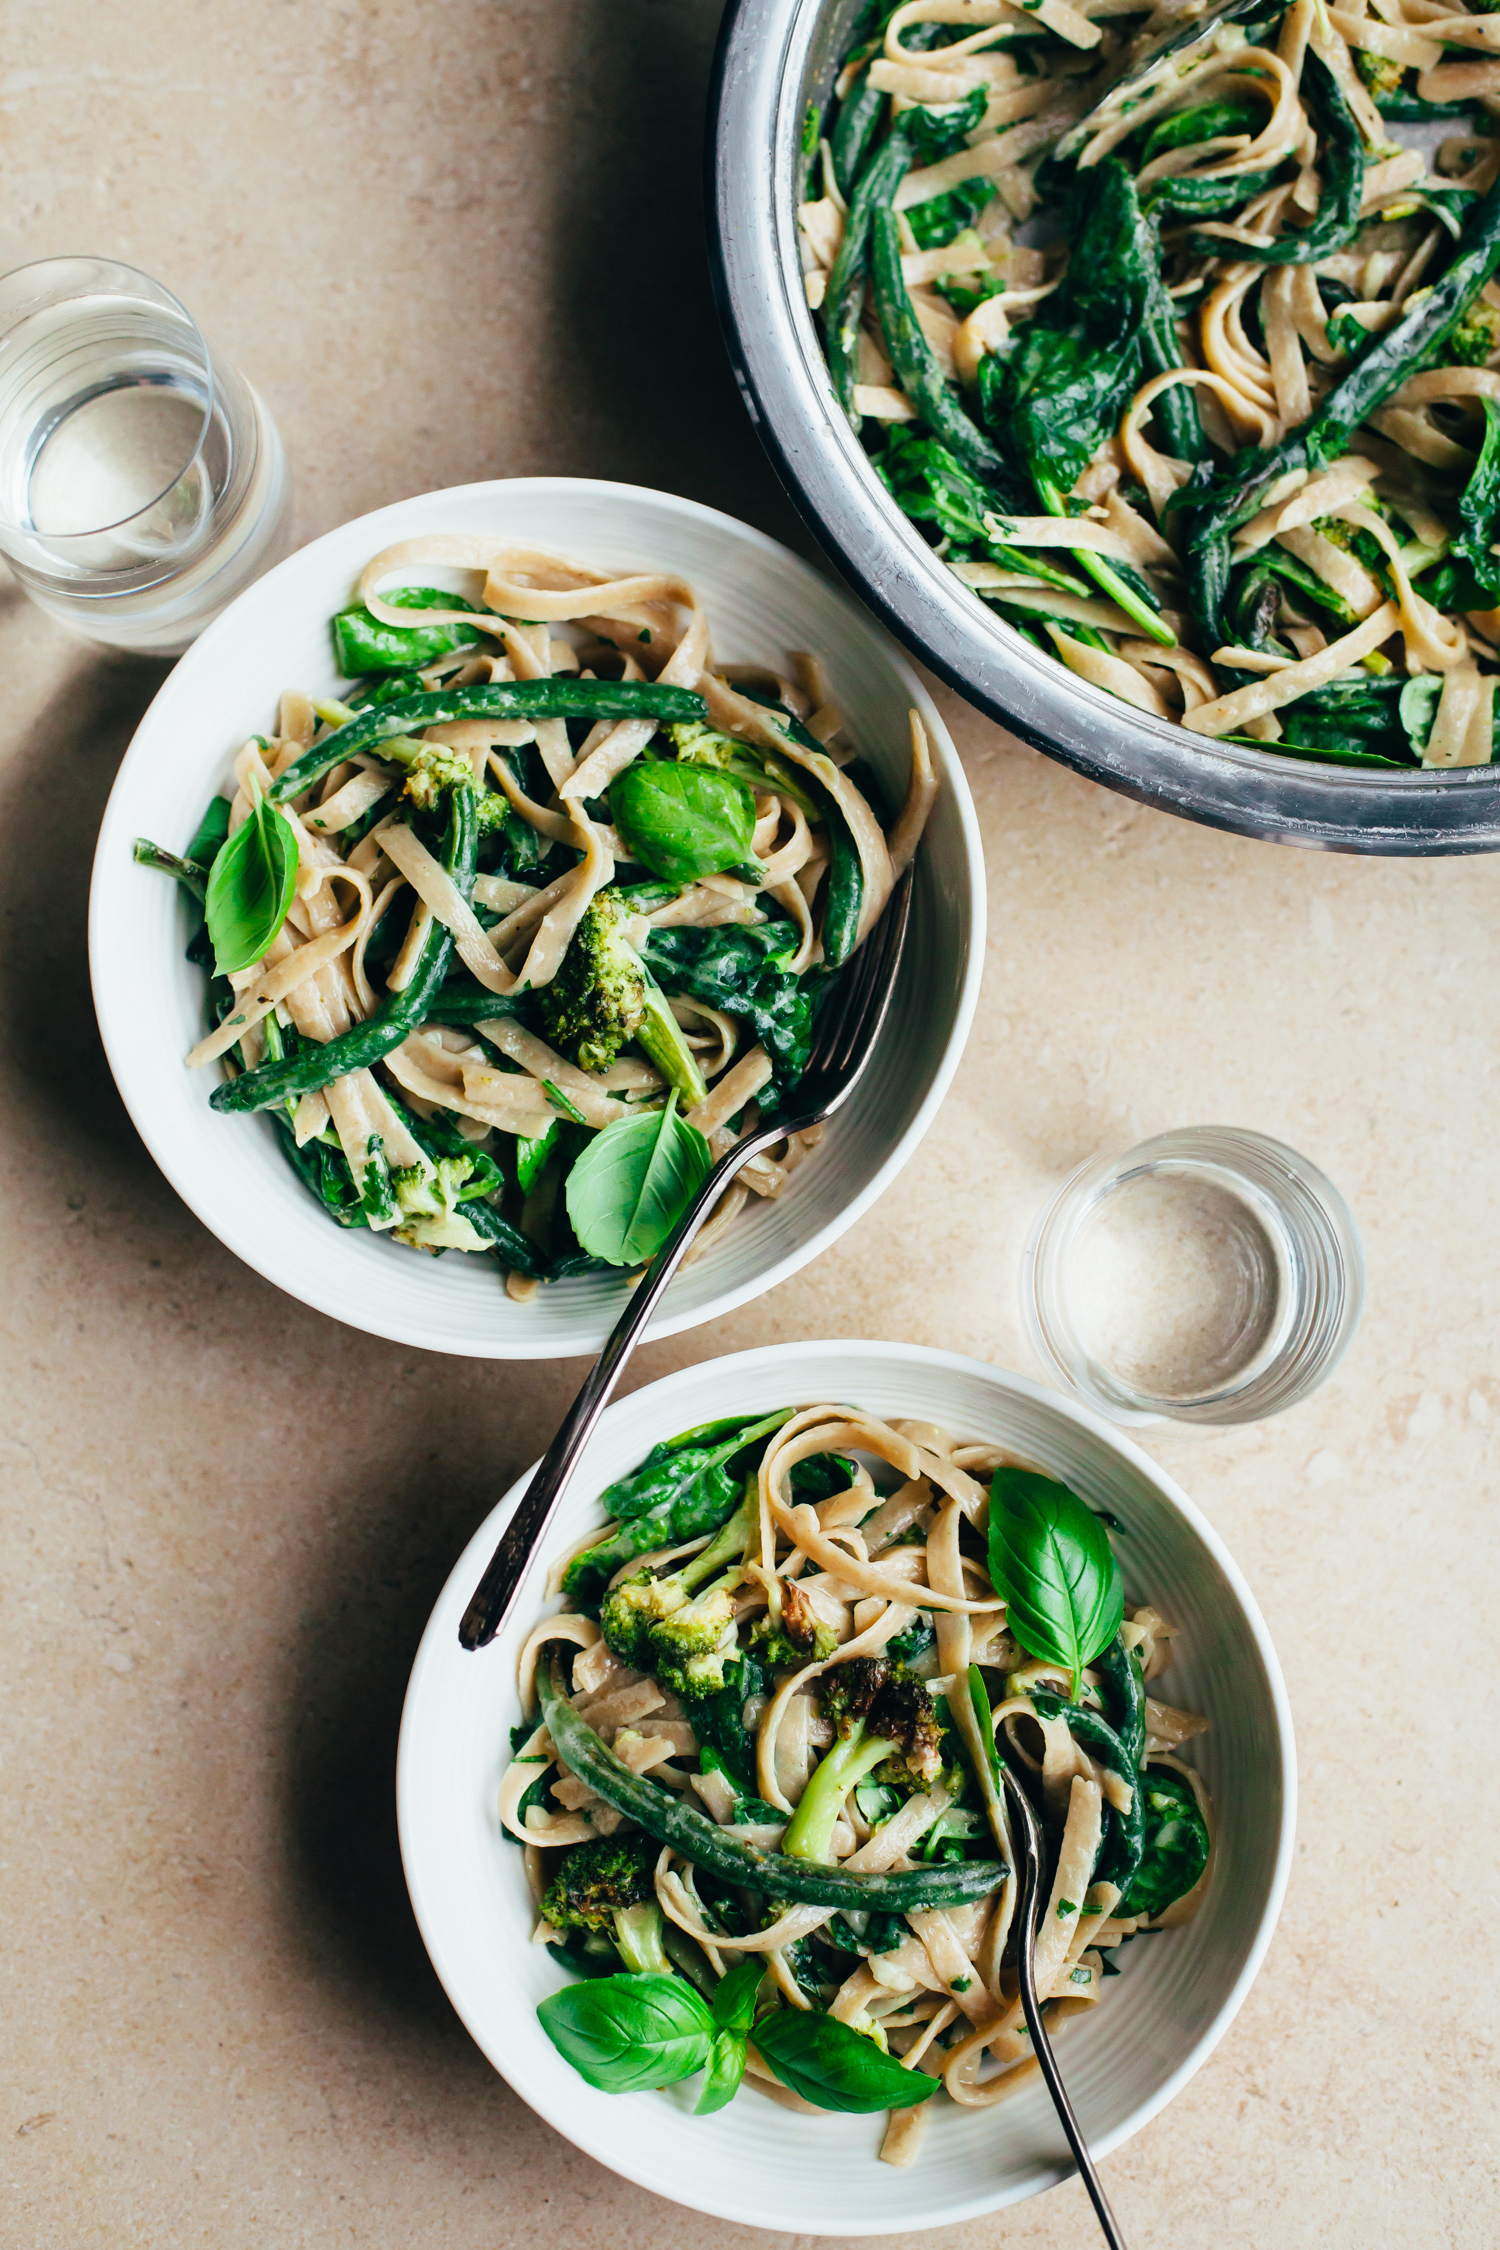 Creamy, Garlicky Fettuccine with Roasted Green Vegetables